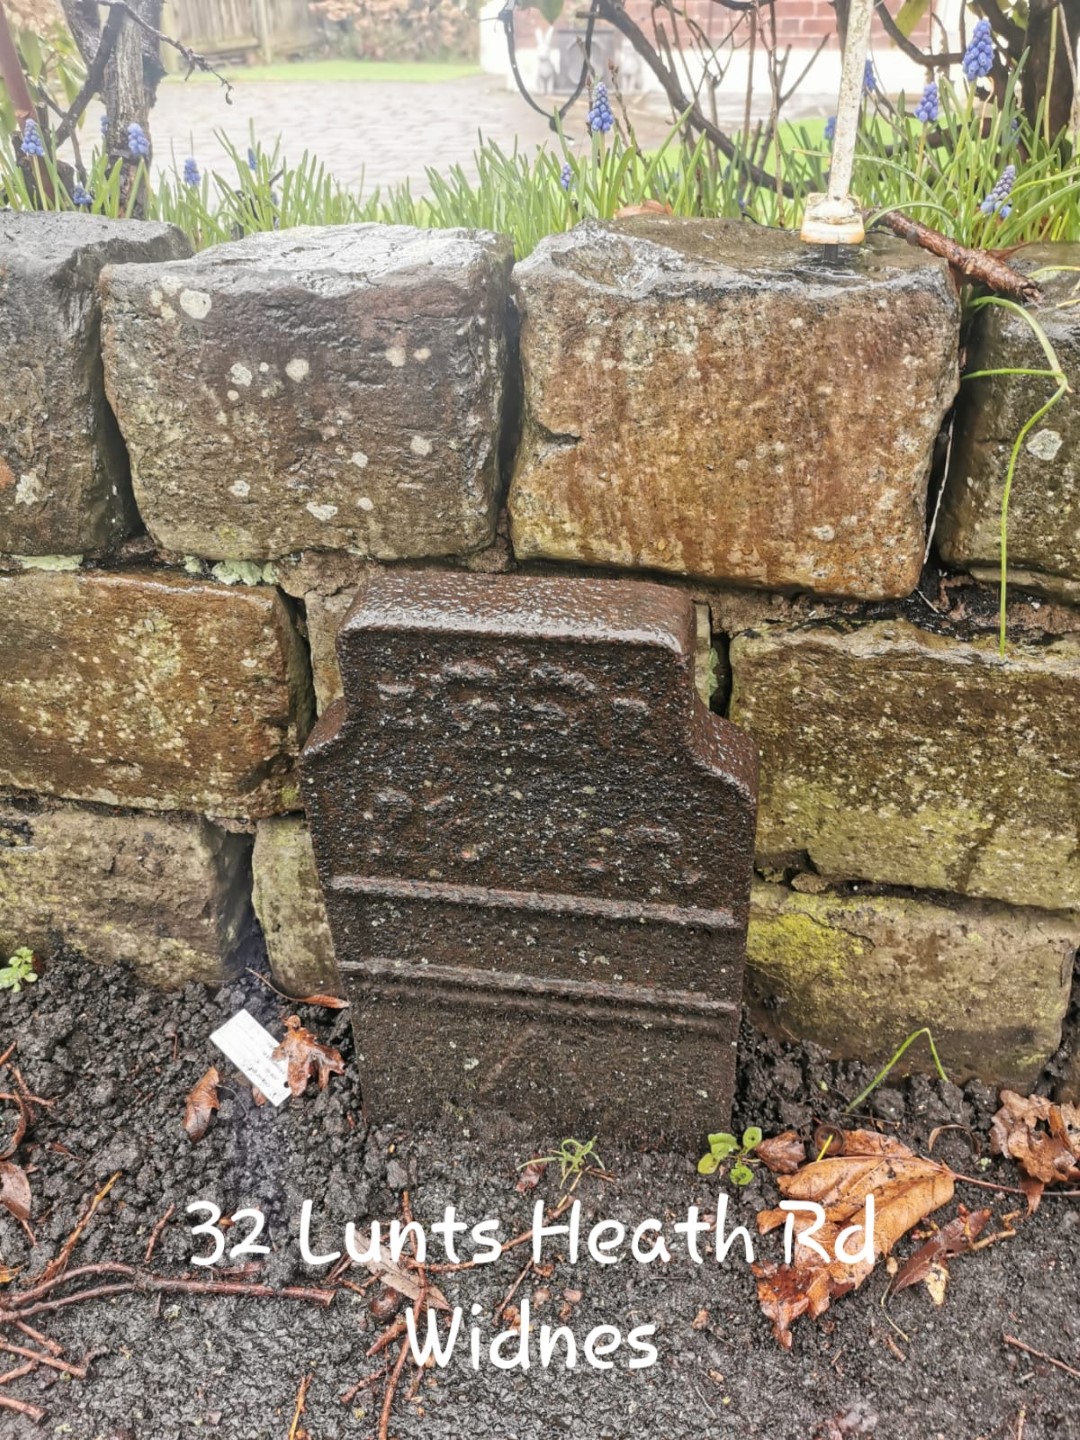 Telegraph cable marker post at 32 Lunts Heath Road, Lunts Heath, Widnes by Jan Gibbons 